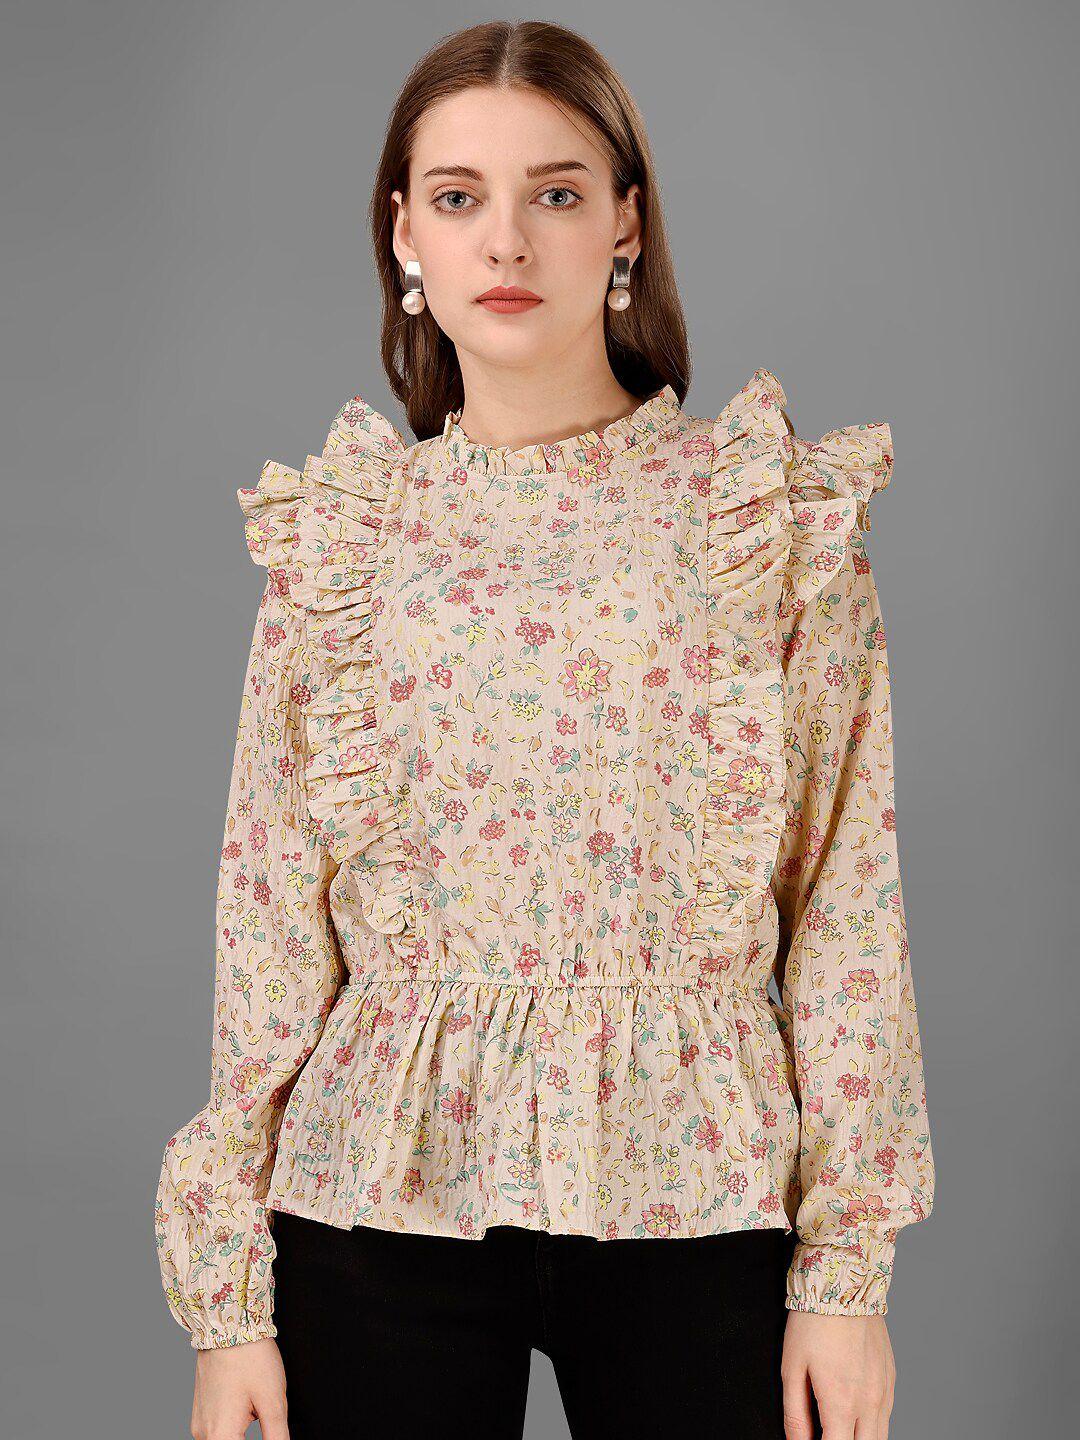 fbella floral printed regular sleeves with ruffles cinched waist top